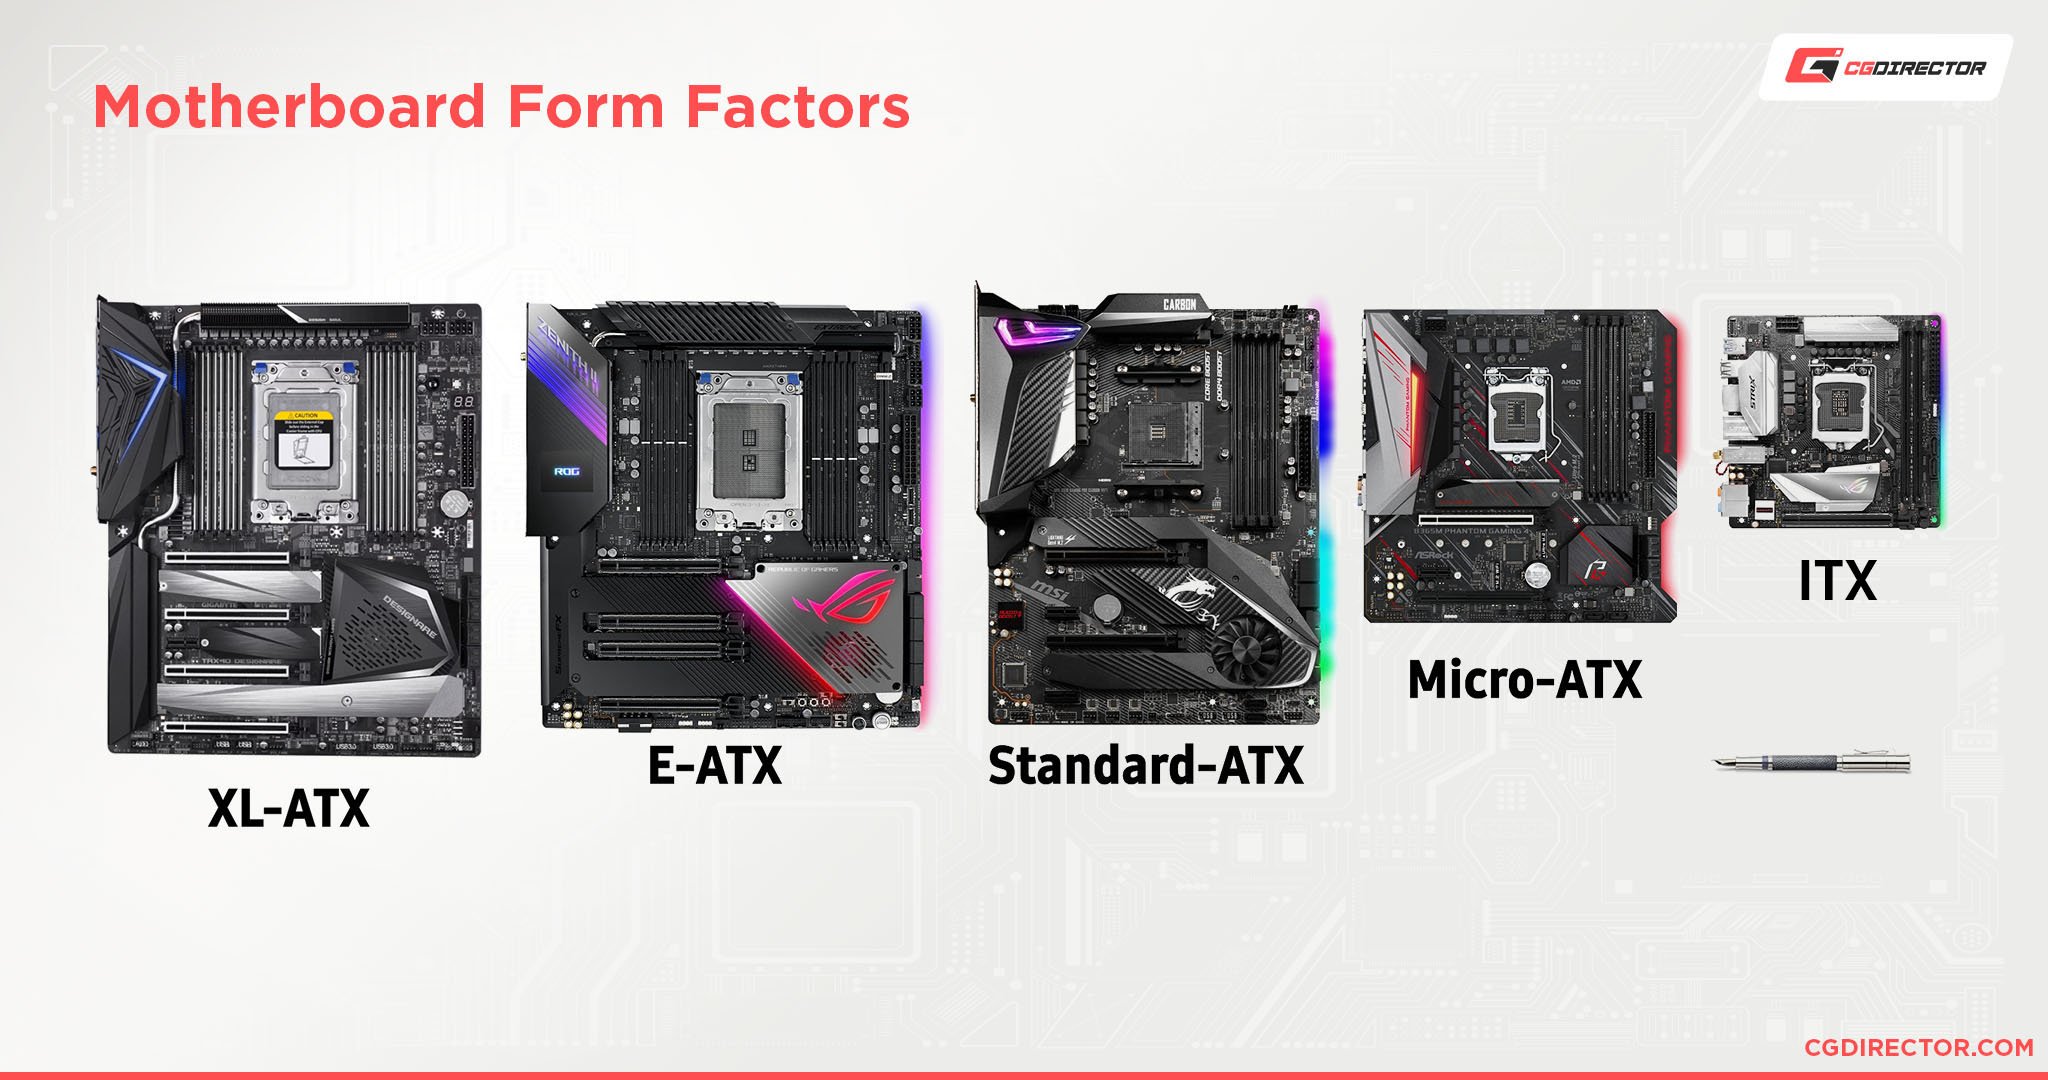 ingesteld Retoucheren Gezicht omhoog What Does ATX Stand For In A Motherboard?